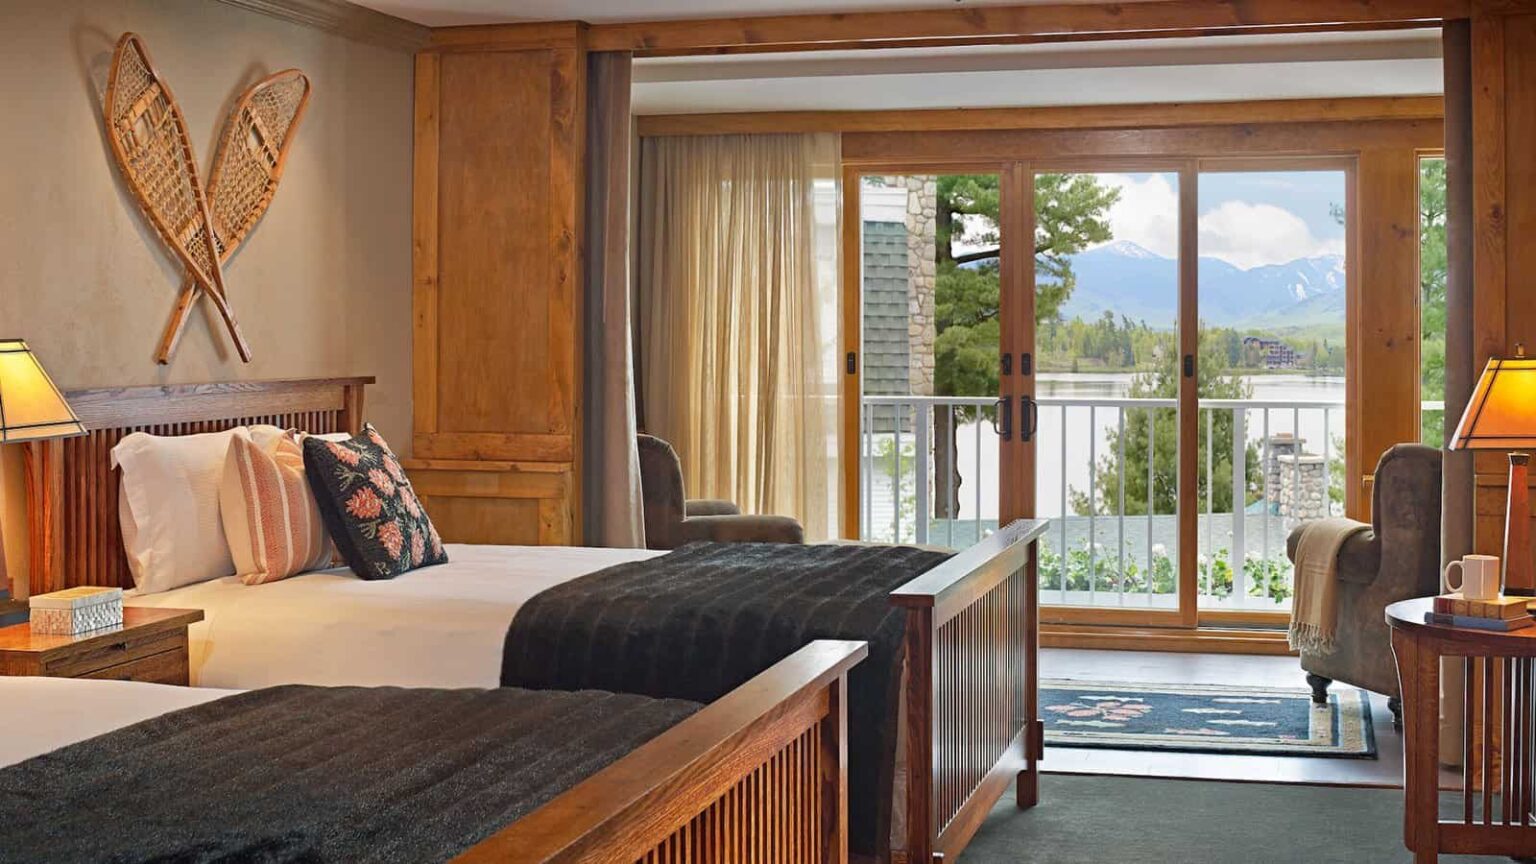 Mirror Lake Inn room with two queen beds and sunroom sitting area